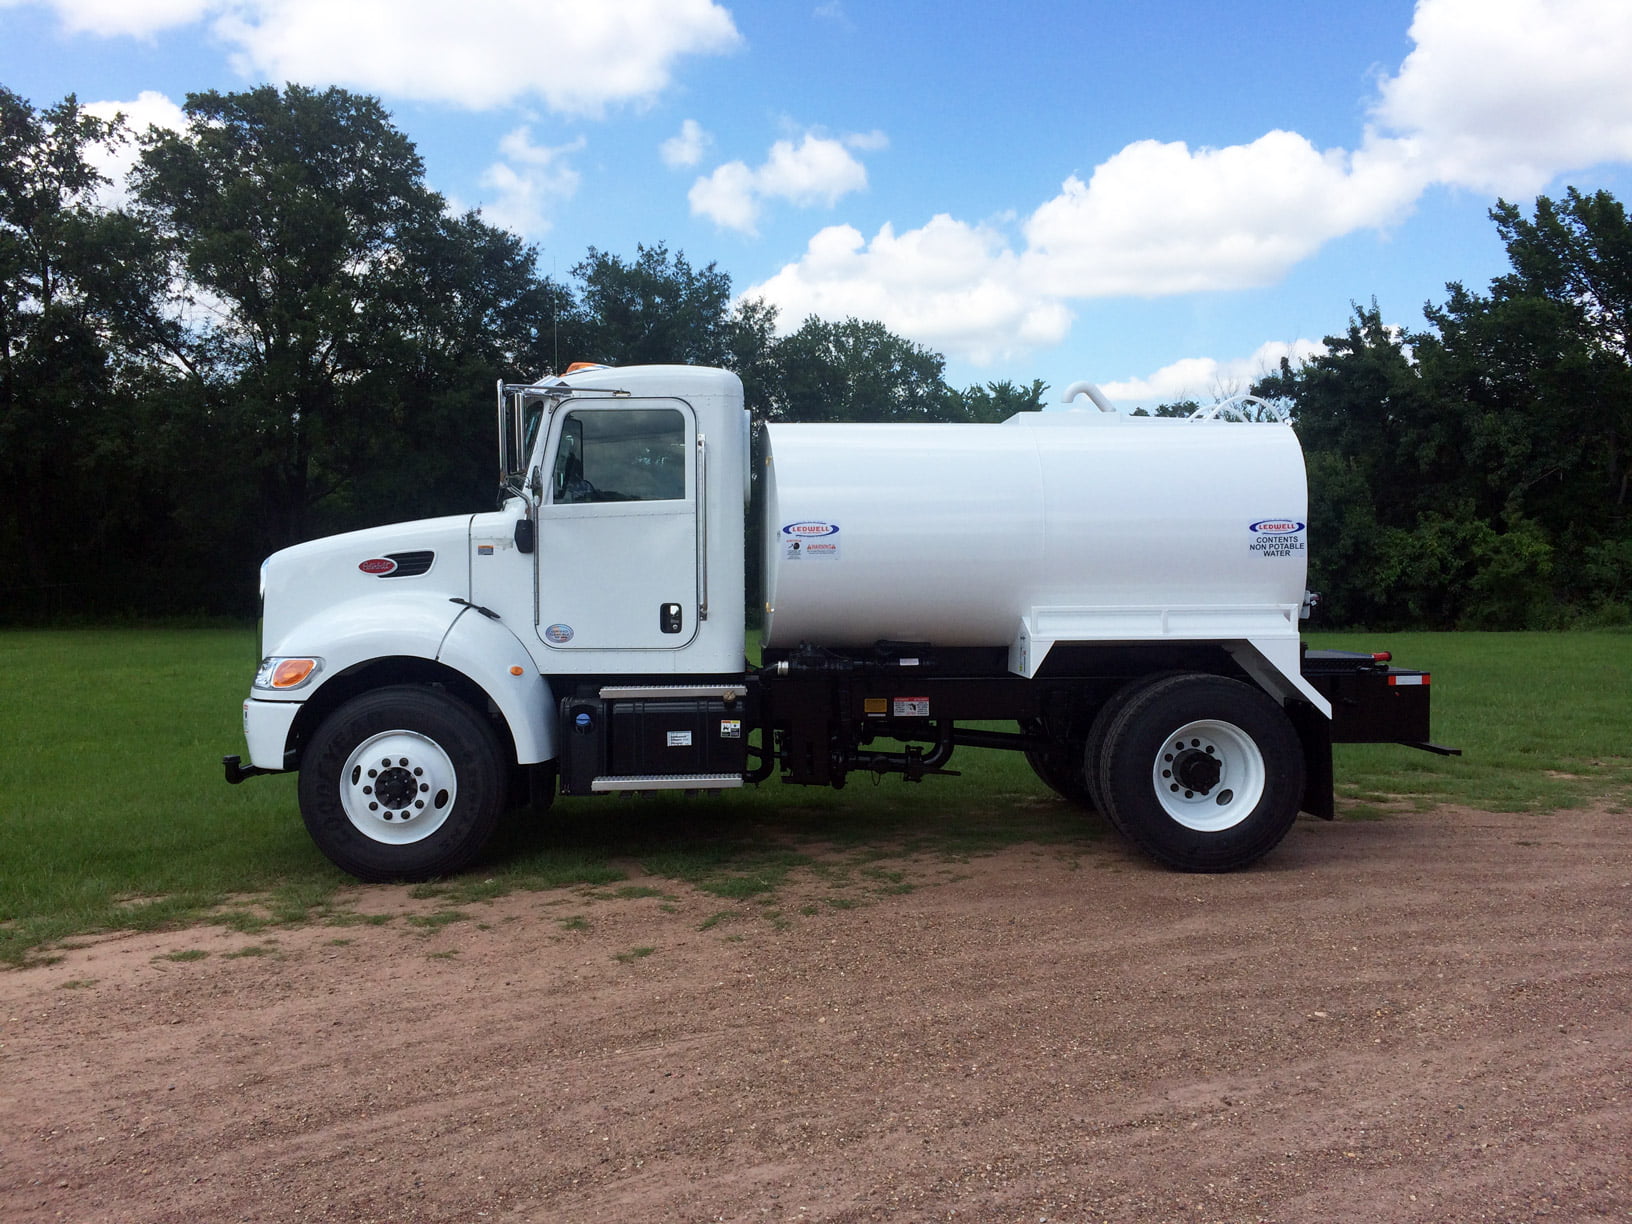 2,000 gallon water truck for sale custom manufactured by ledwell